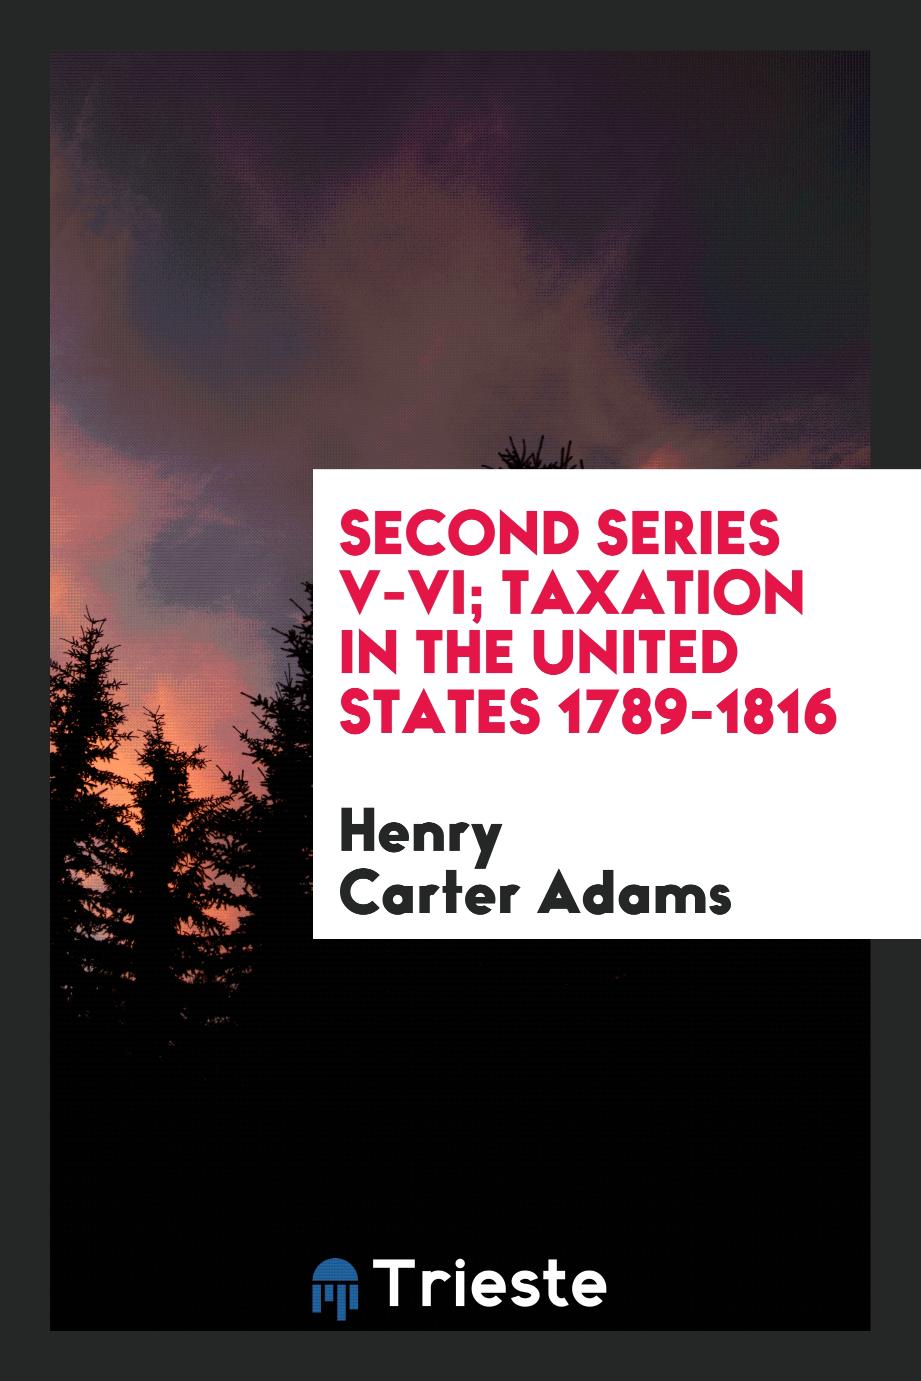 Second series V-VI; Taxation in the United States 1789-1816